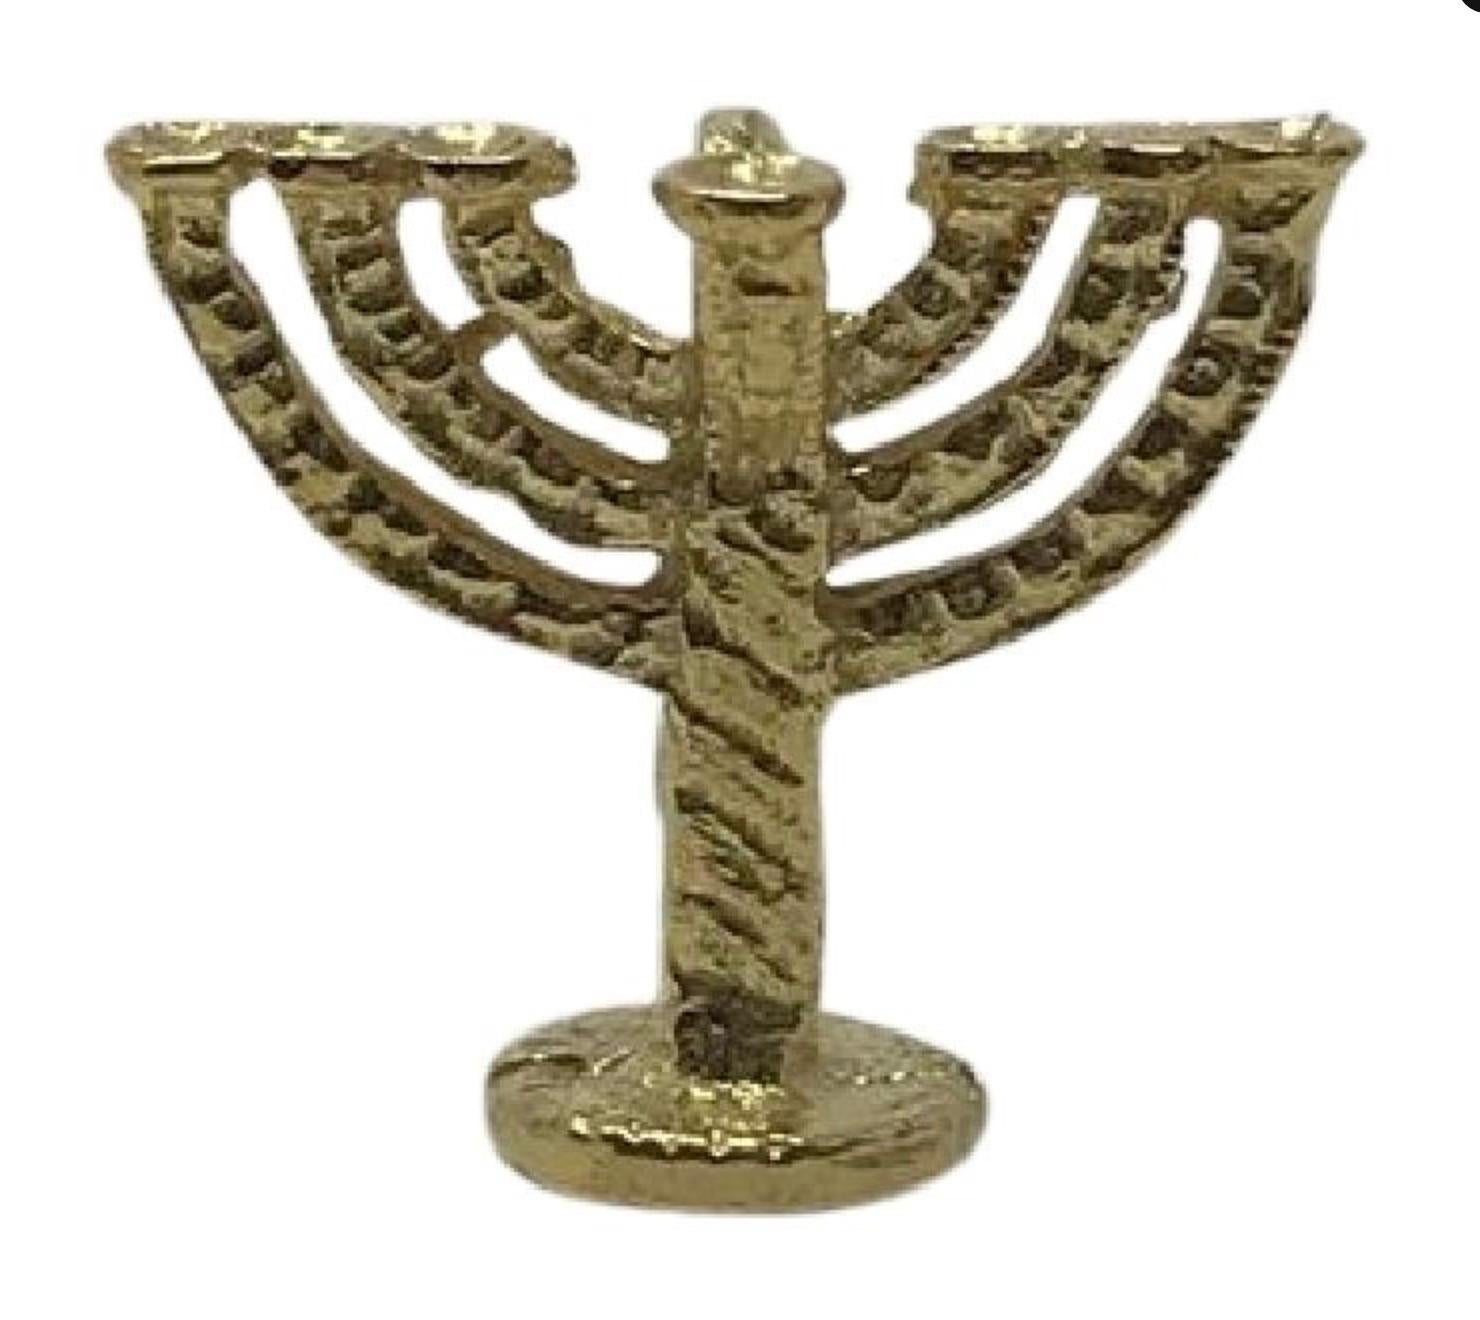 Item - 18k Yellow Gold Menorah Charm/Pendent

Condition - Exceptional

SKU - 1556

Original Retail Price - 300

Dimensions - 17mm x 15mm x 8mm

Material - 18k Yellow Gold

Weight - 2.75 grams

Comes with - No Additional Accessories

Available in